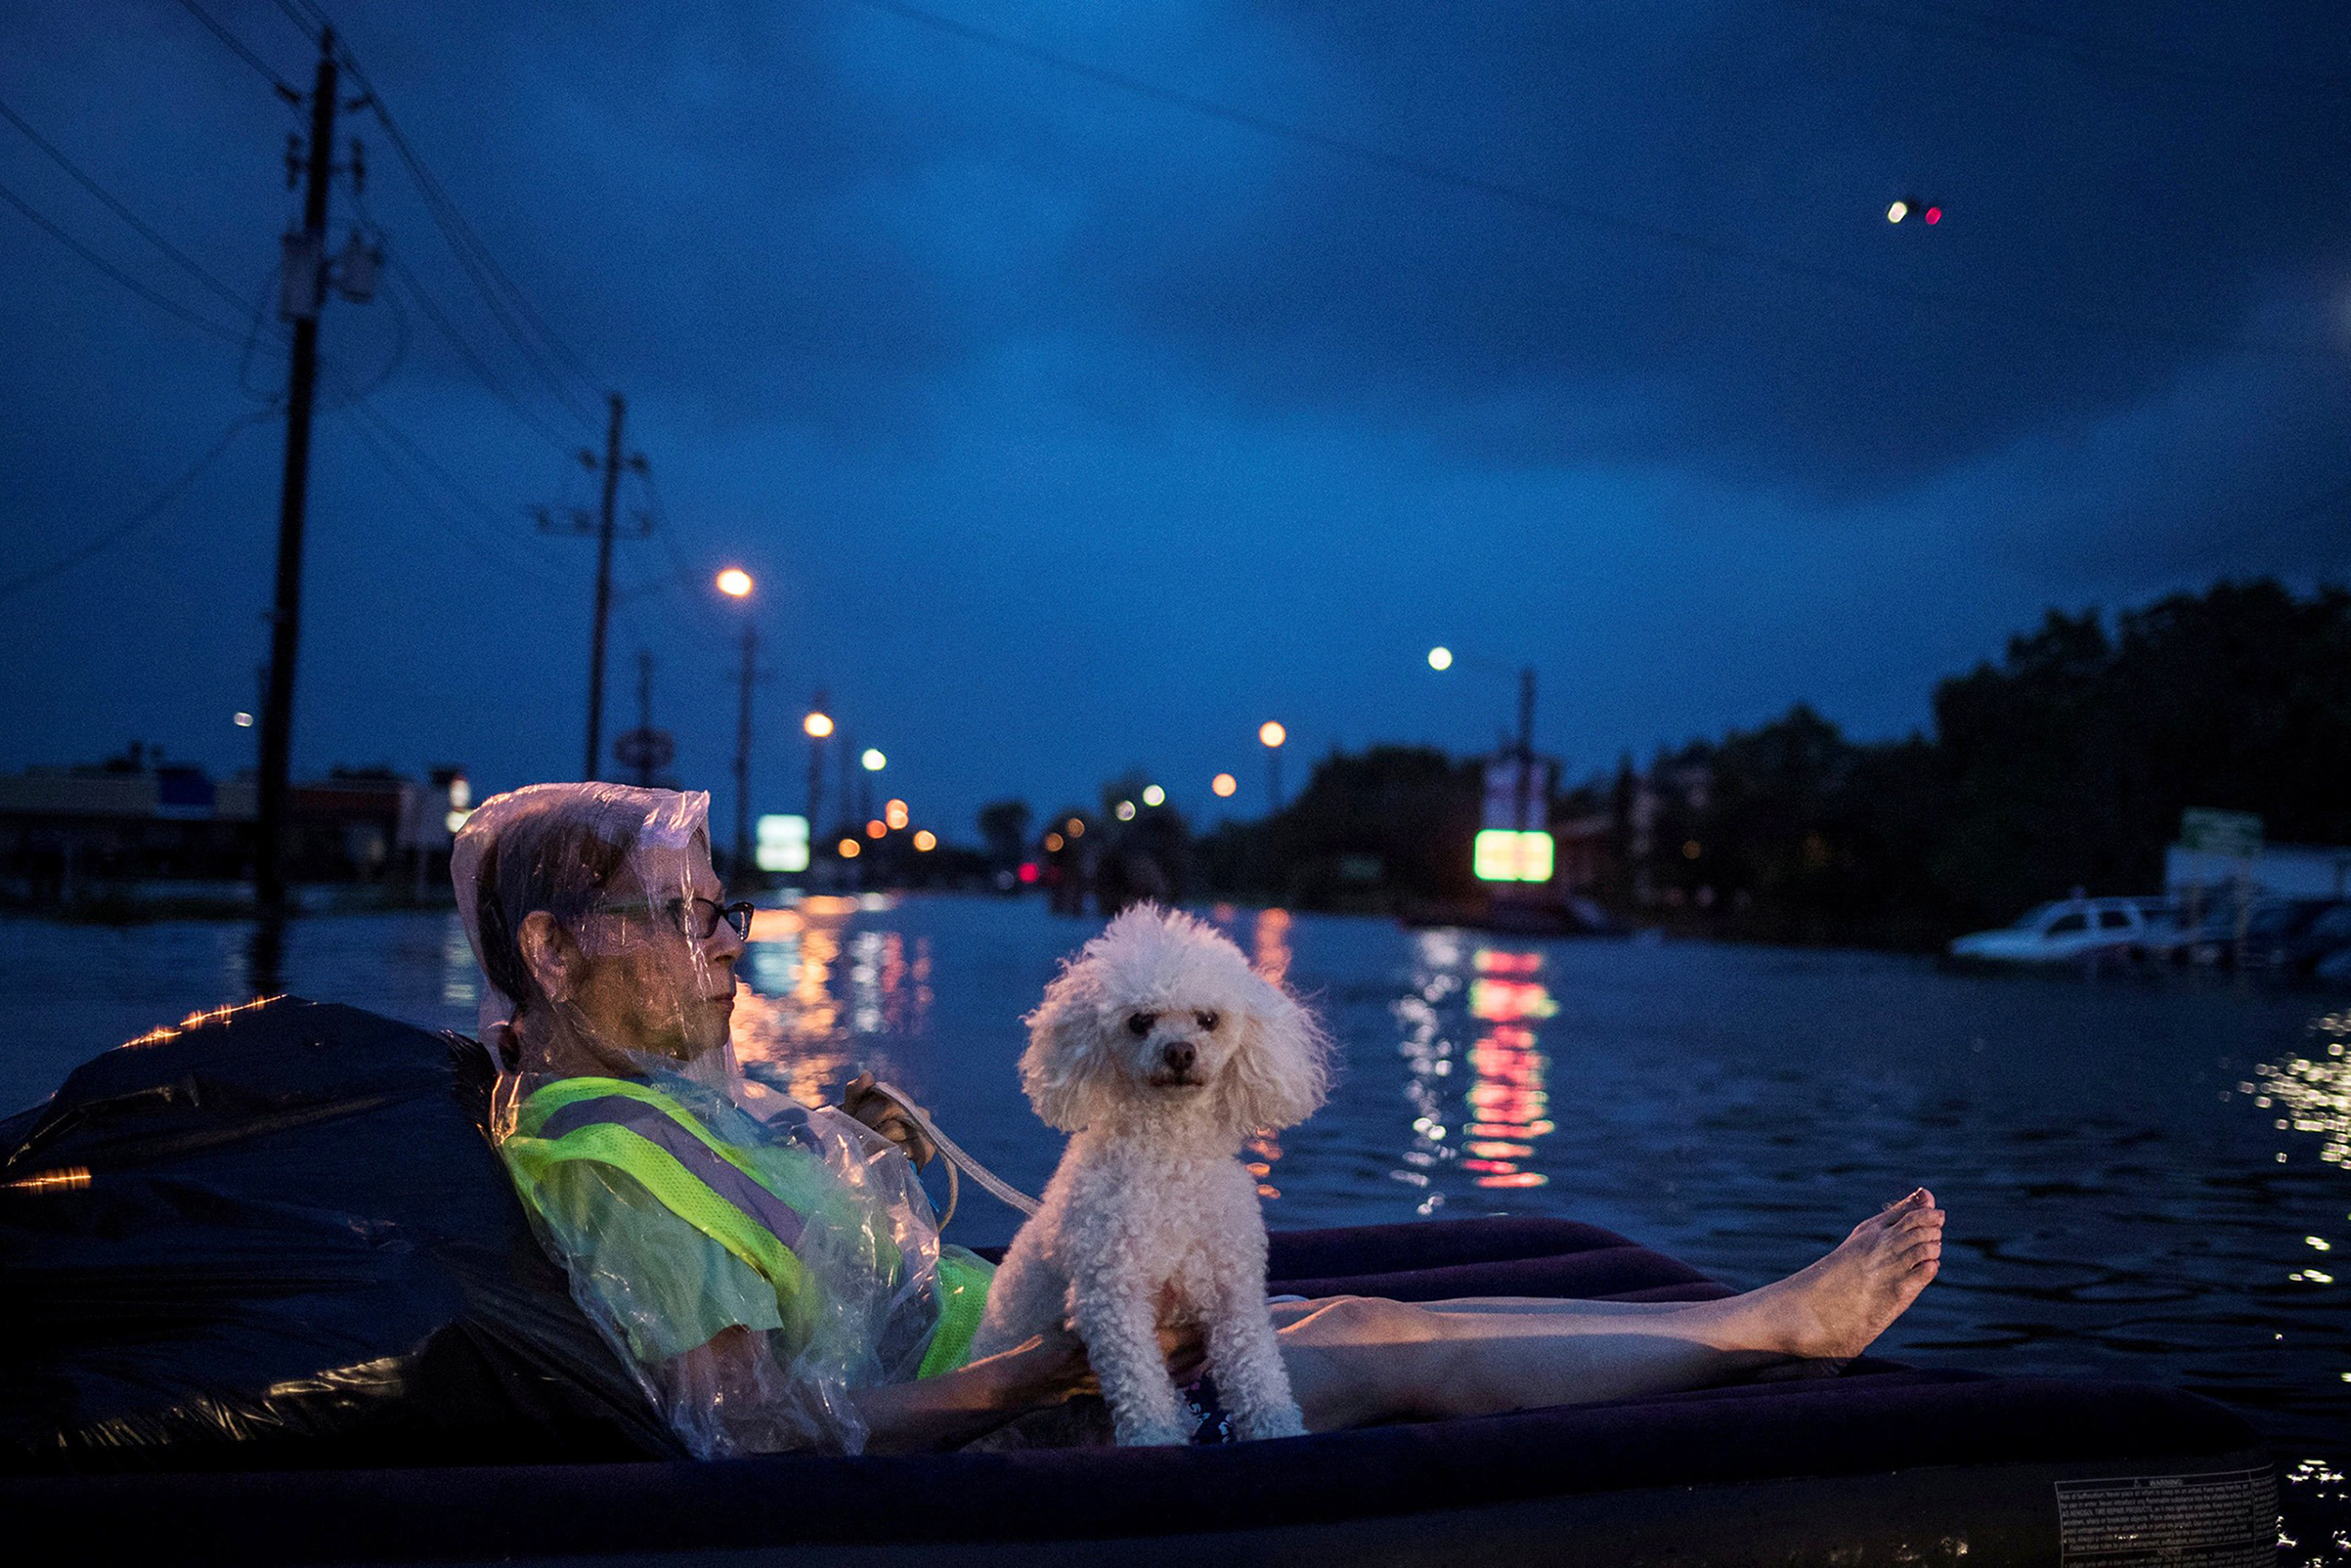 With an air mattress as a life raft, a survivor and her dog await recovery; a rescue helicopter hovered nearby (Adrees Latif—Reuters)